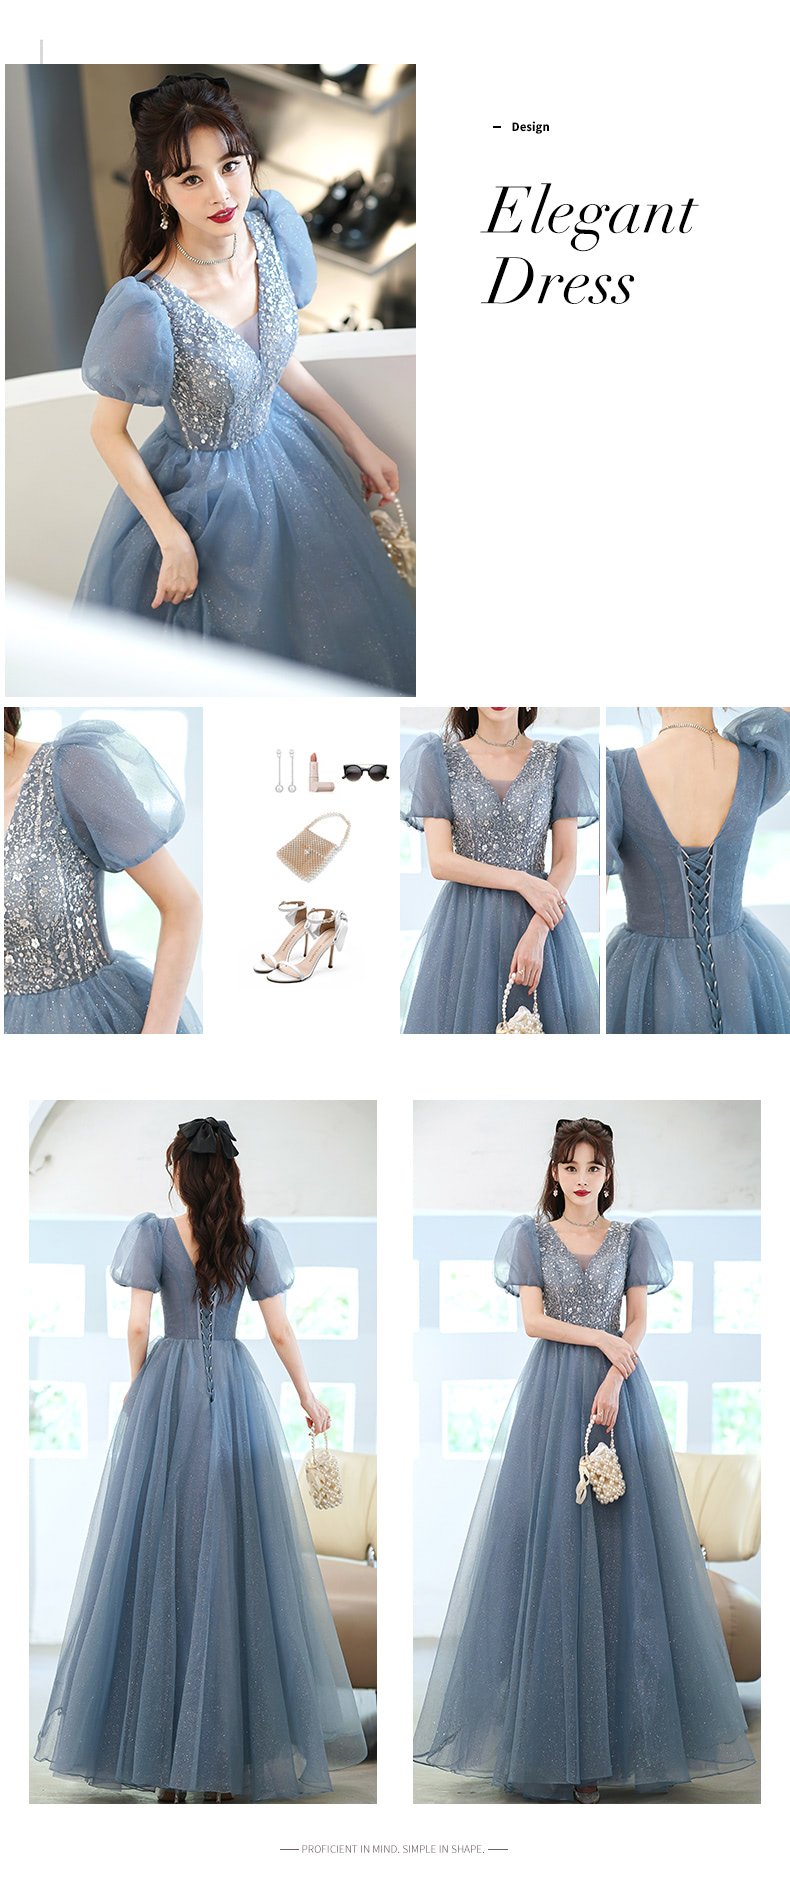 A-Line-Blue-Tulle-Short-Sleeve-Prom-Party-Formal-Evening-Dress11.jpg